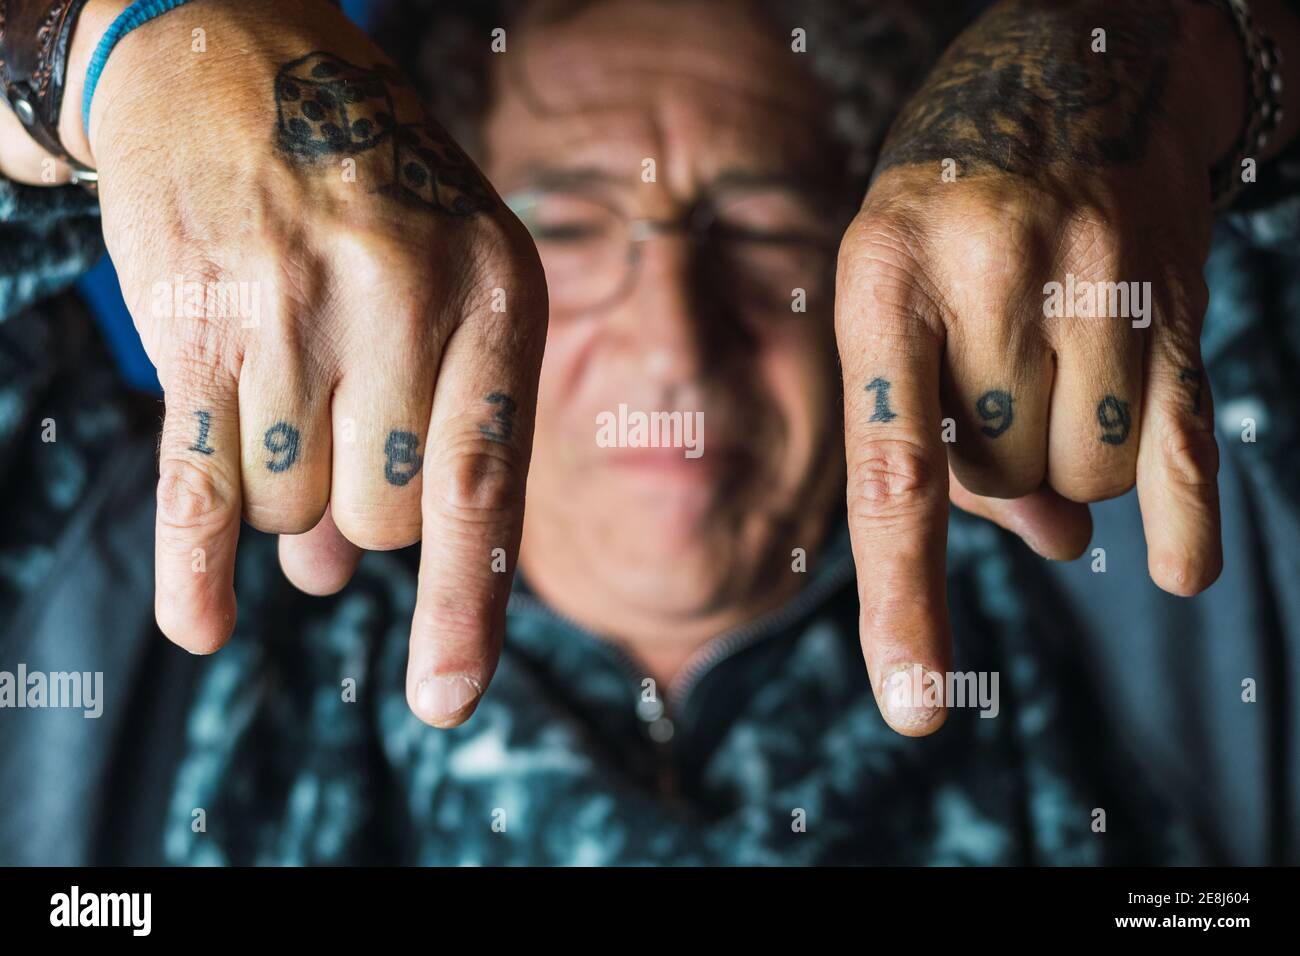 Man Shows His Wrist Tattoos Background, Pictures Of Cuts On Arms, Cut Out,  Man Background Image And Wallpaper for Free Download